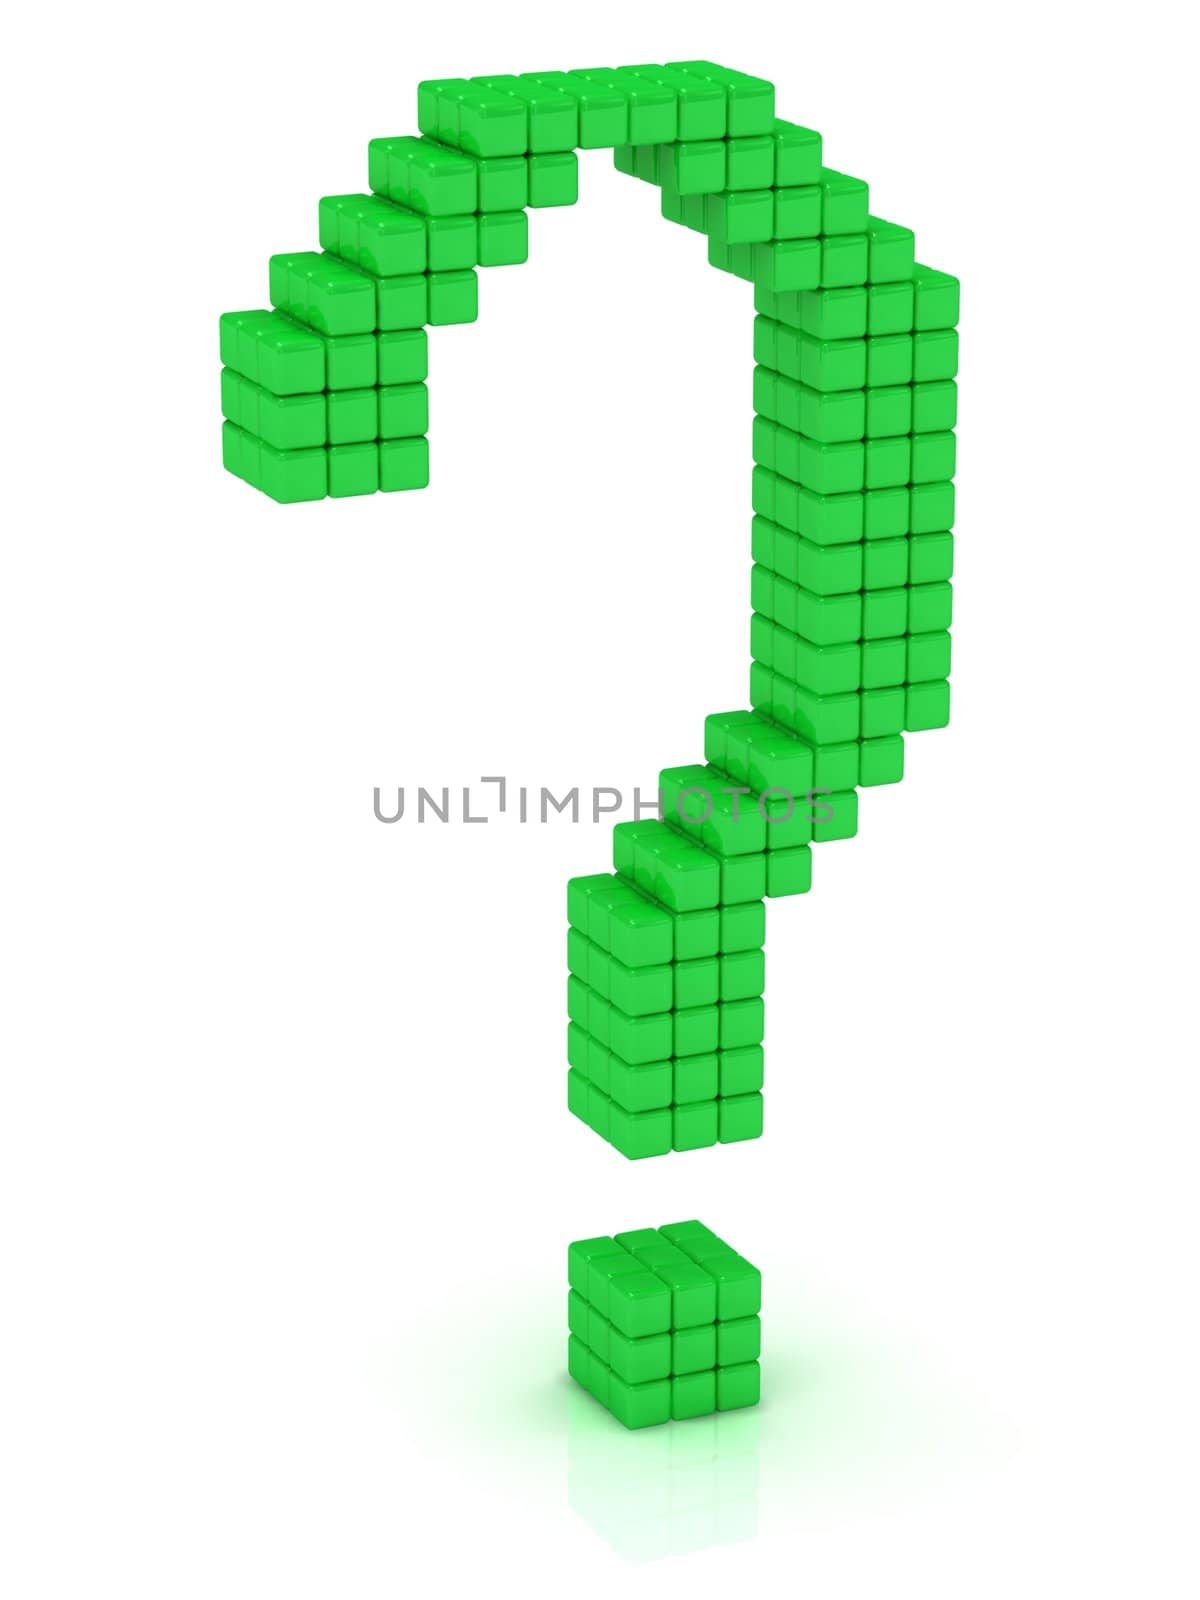 Green question mark cube on a white background